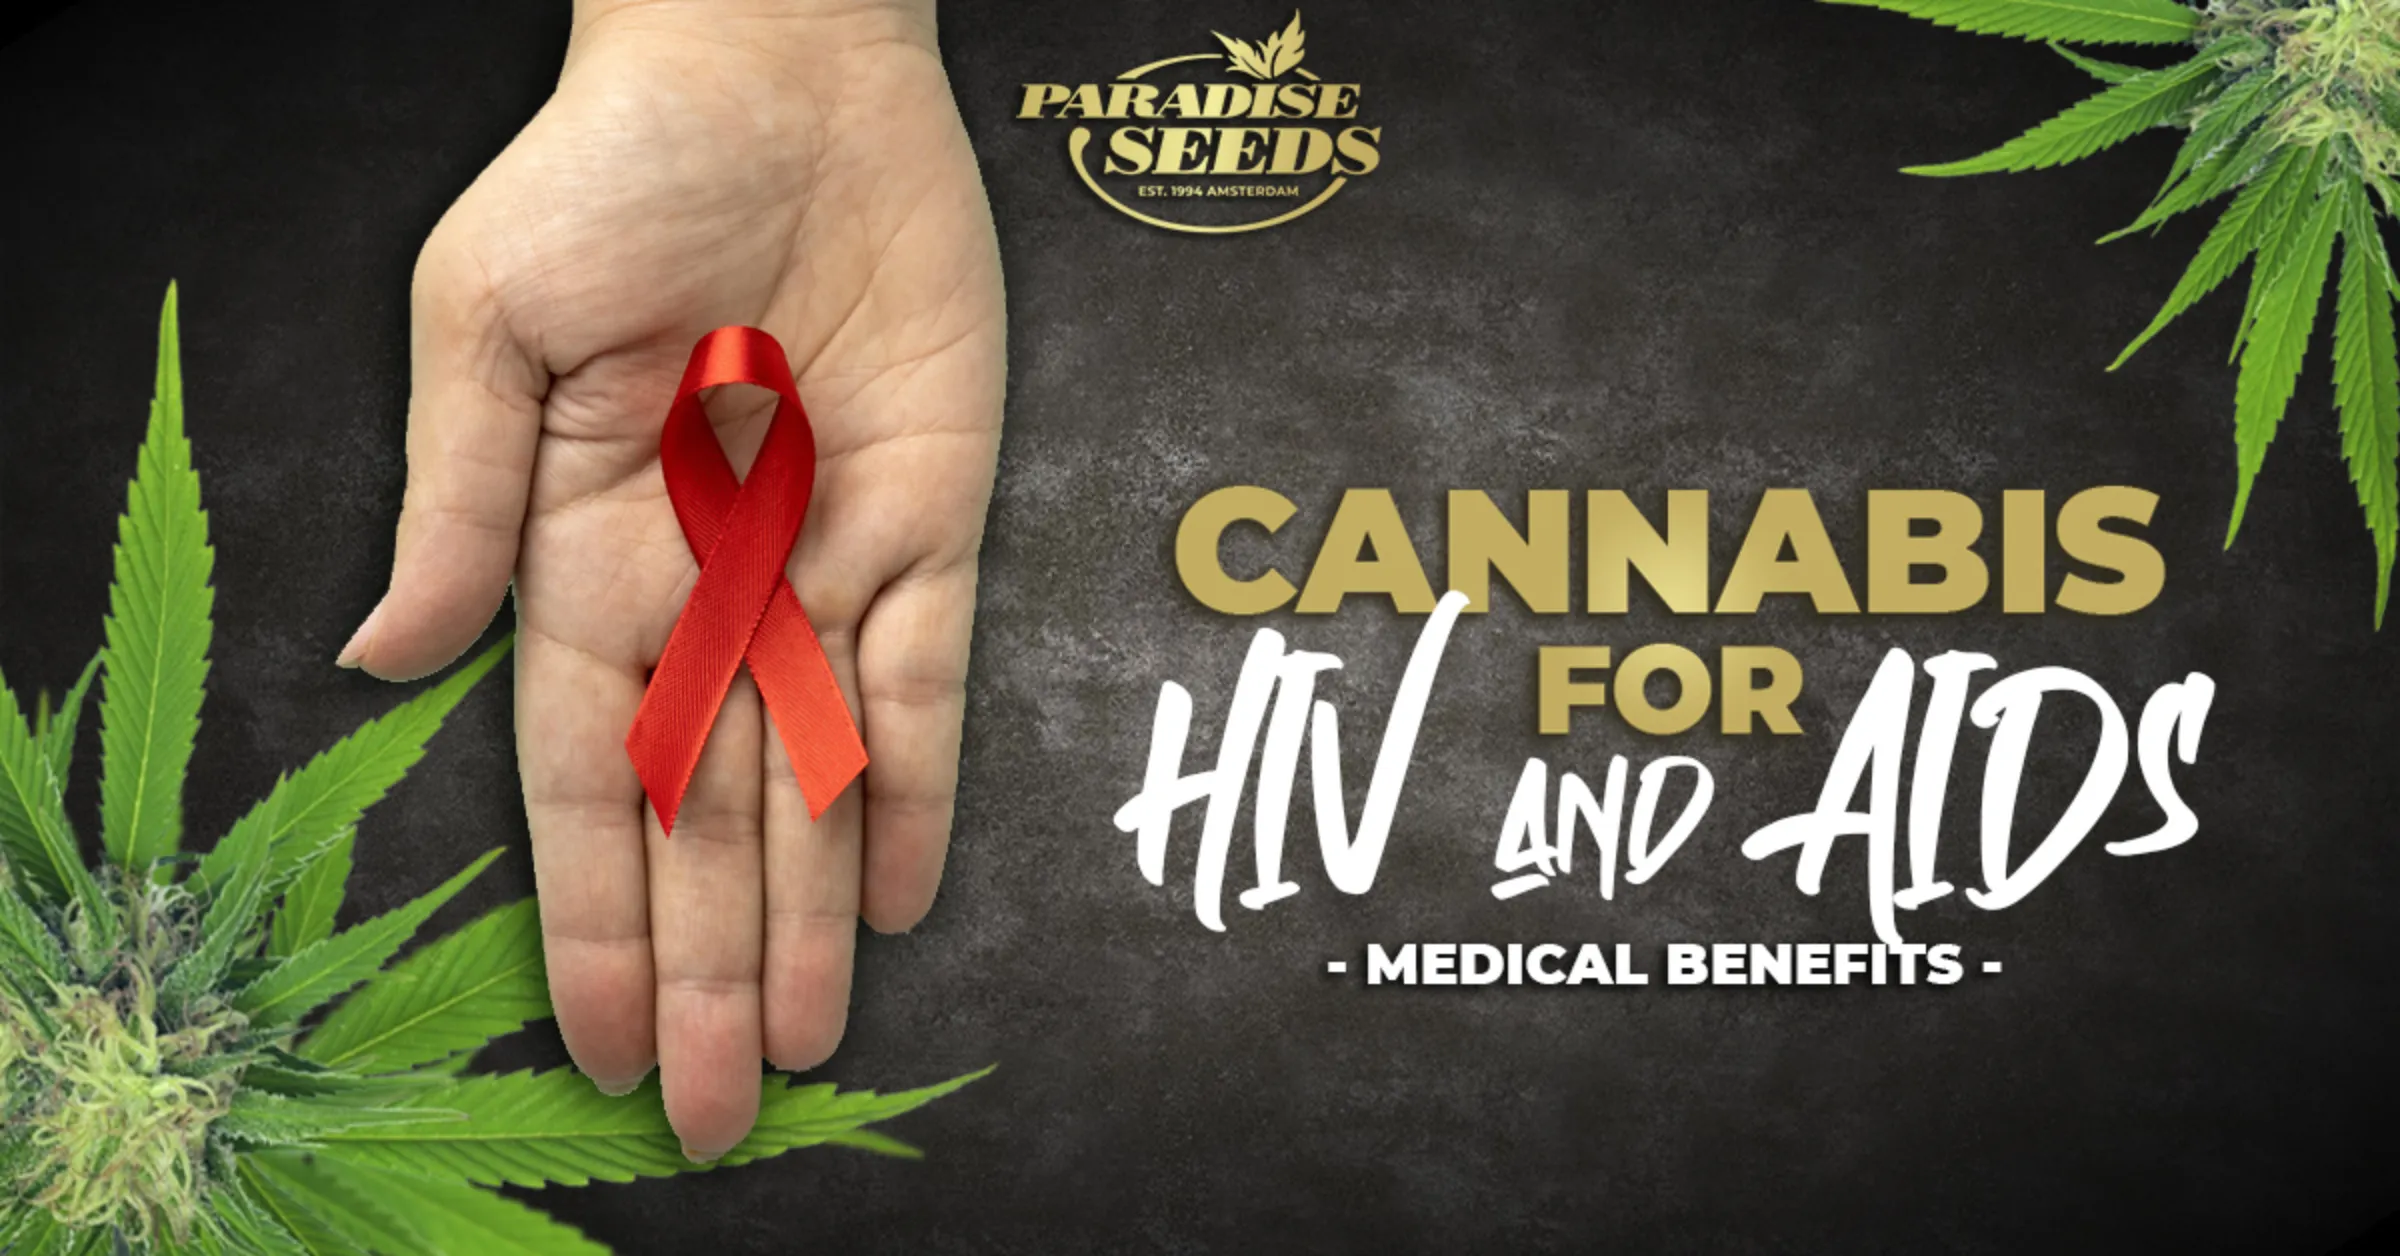 The Benefits of Medical Cannabis for HIV and AIDS patients